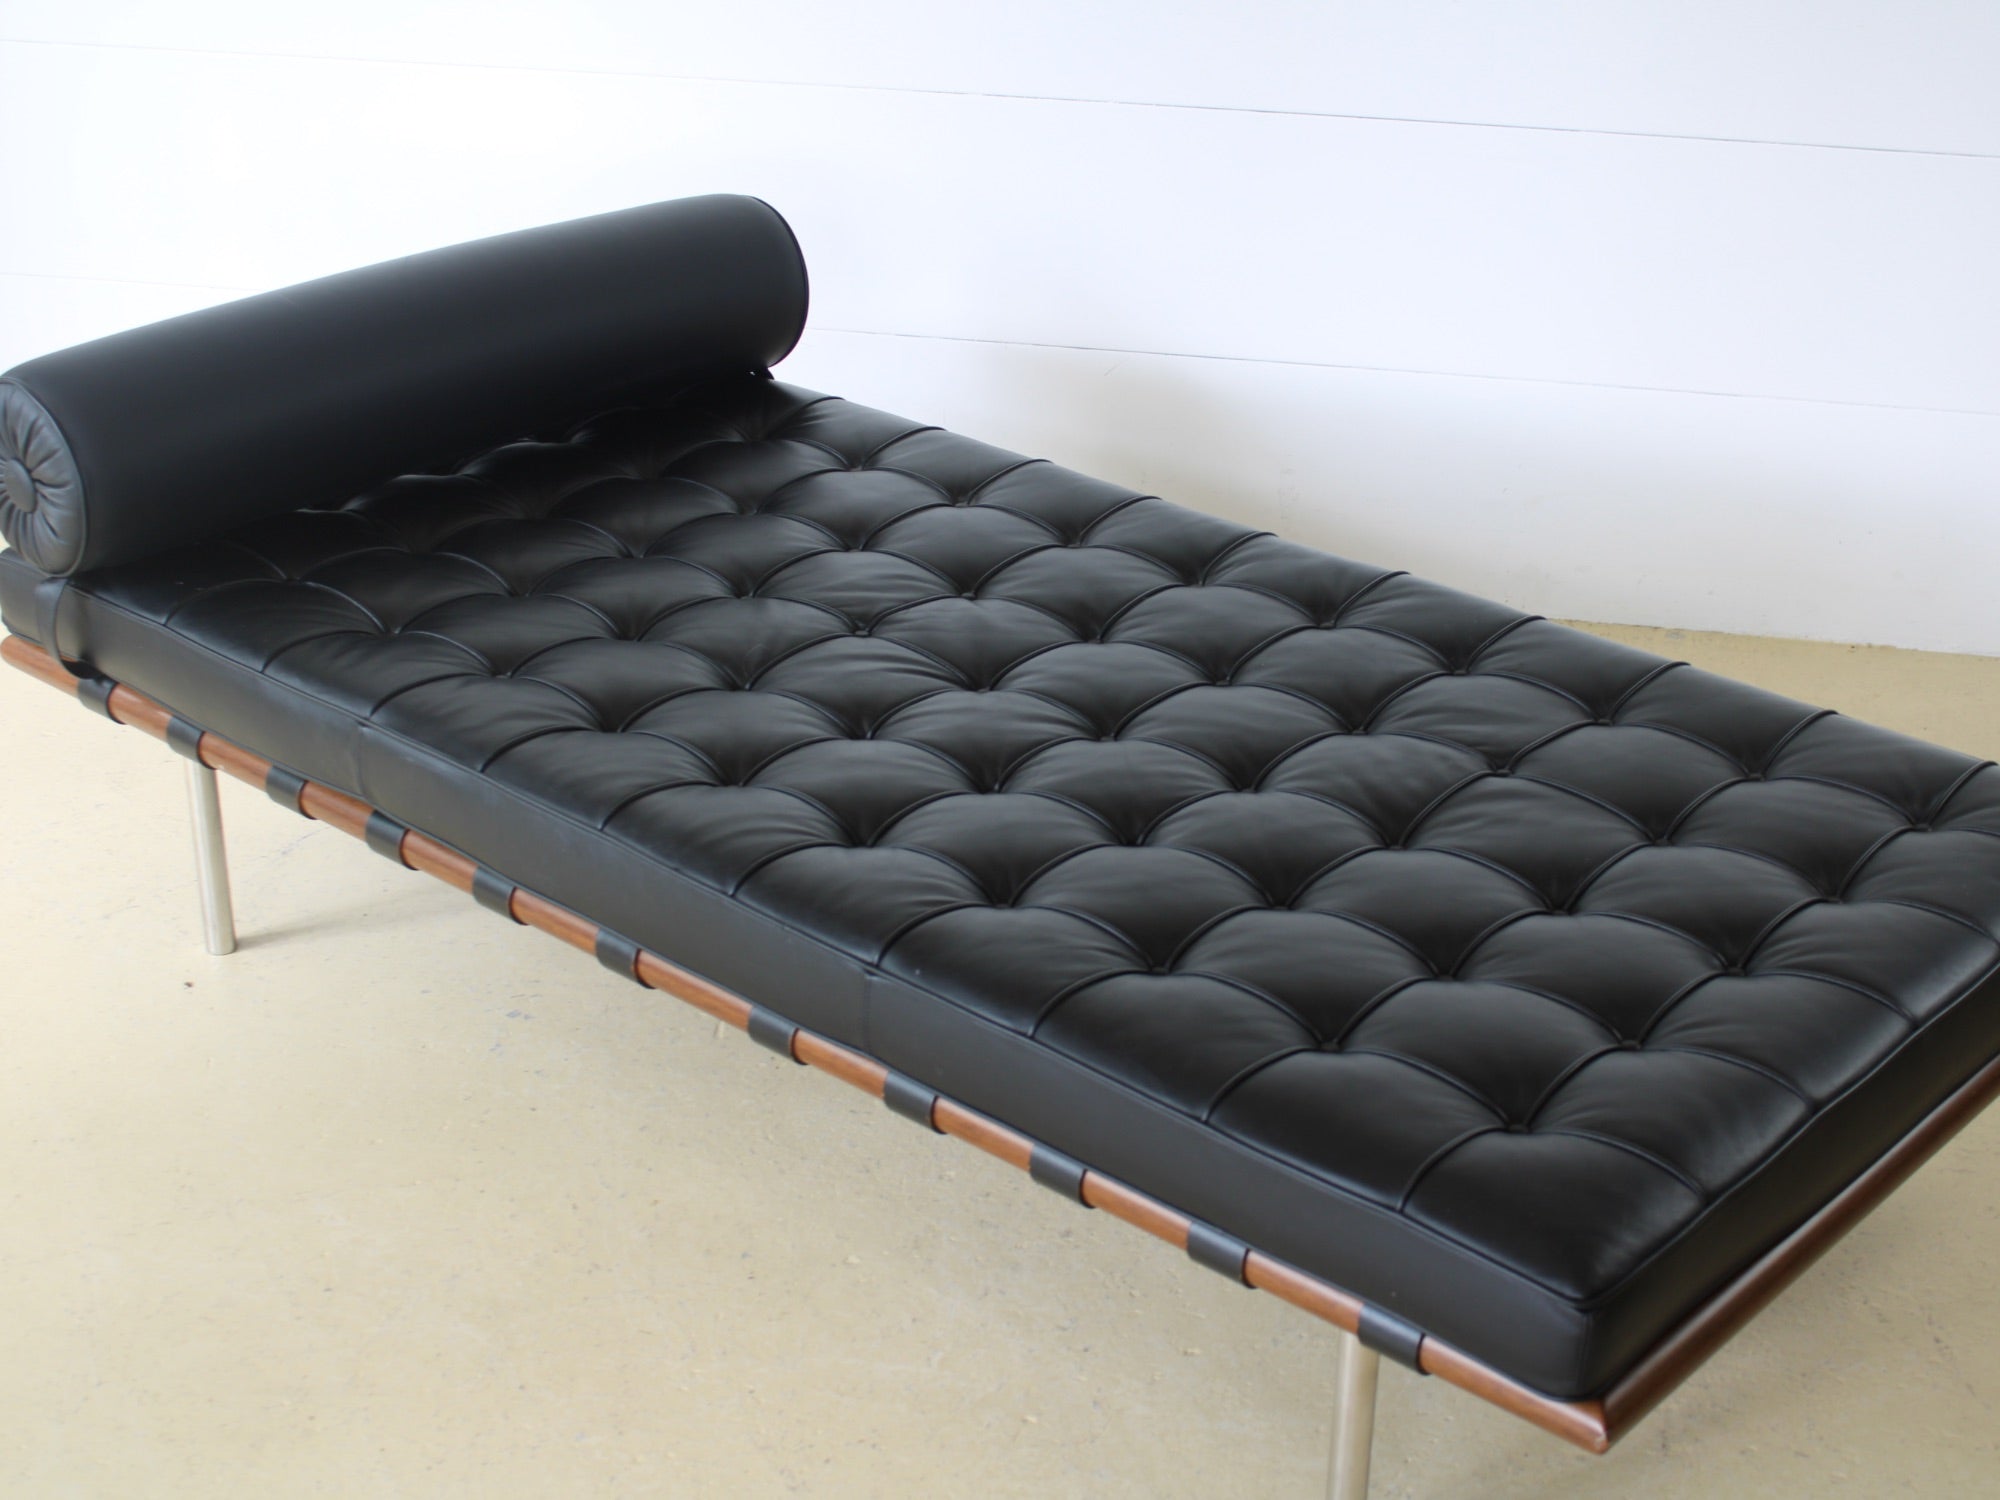 Barcelona Daybed, Ludwig Mies van der Rohe Knoll